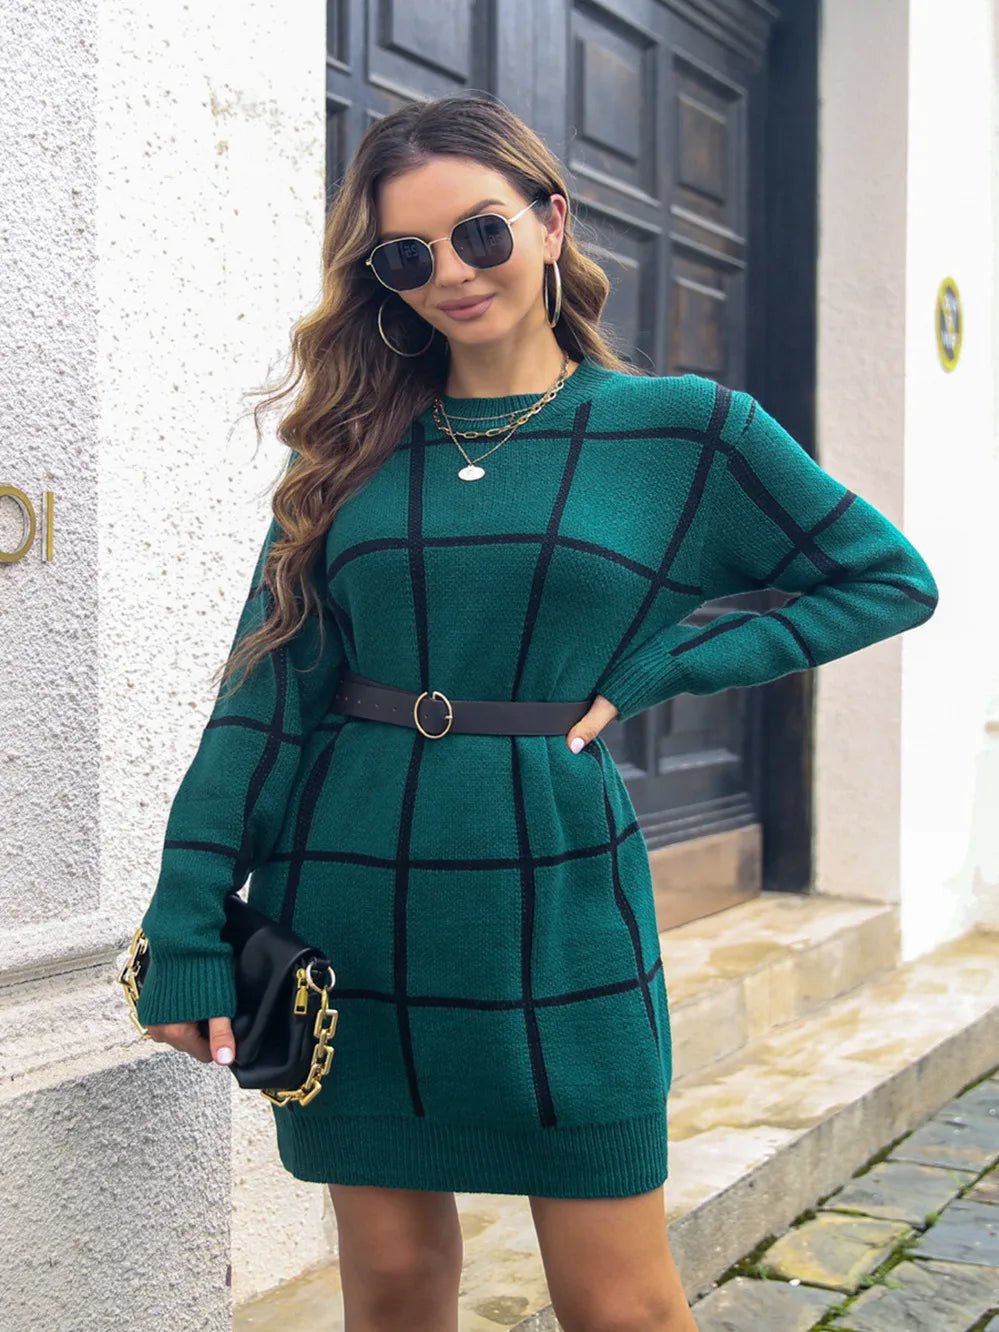 Plaid Long Sleeve Sweater Dress Casual Loose Knitted Dress